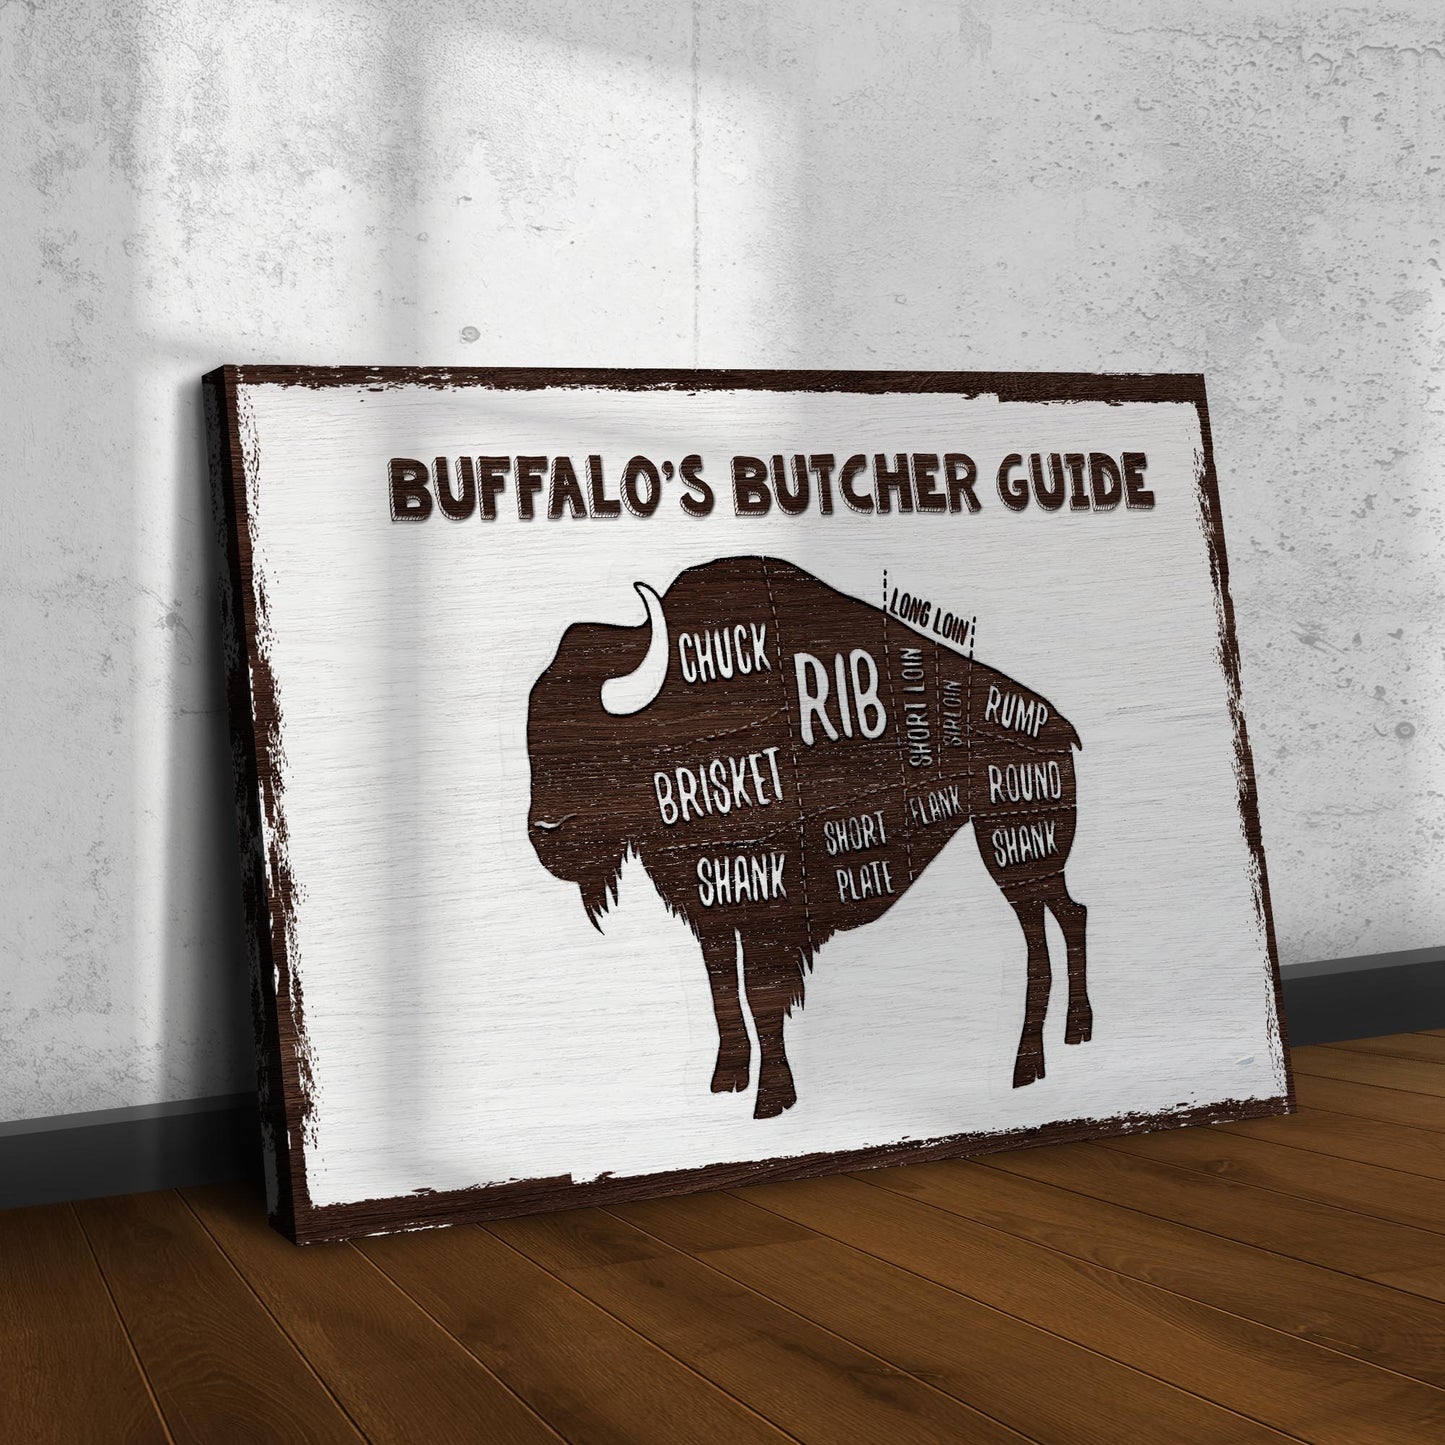 Buffalo's Butcher Guide Sign - Image by Tailored Canvases